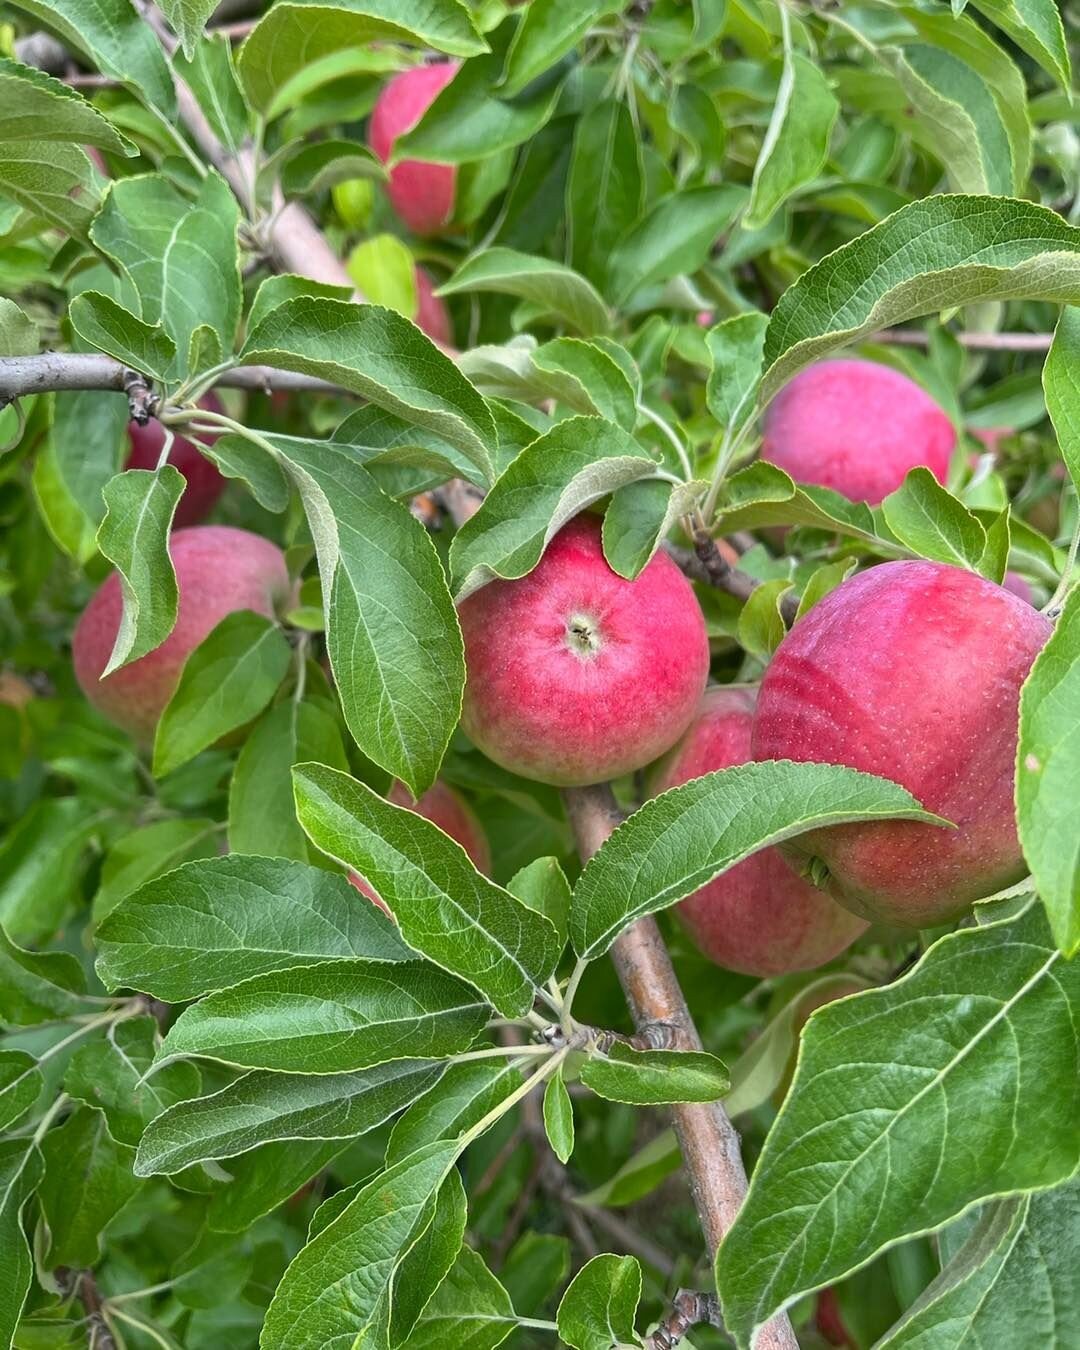 The first pick of the macintosh crop is ready!  There is nothing quite like biting into an apple freshly picked off the tree.

We have lots for picking and 1/2 pecks ready to be picked up if you don&rsquo;t have time to pick but still want the freshe